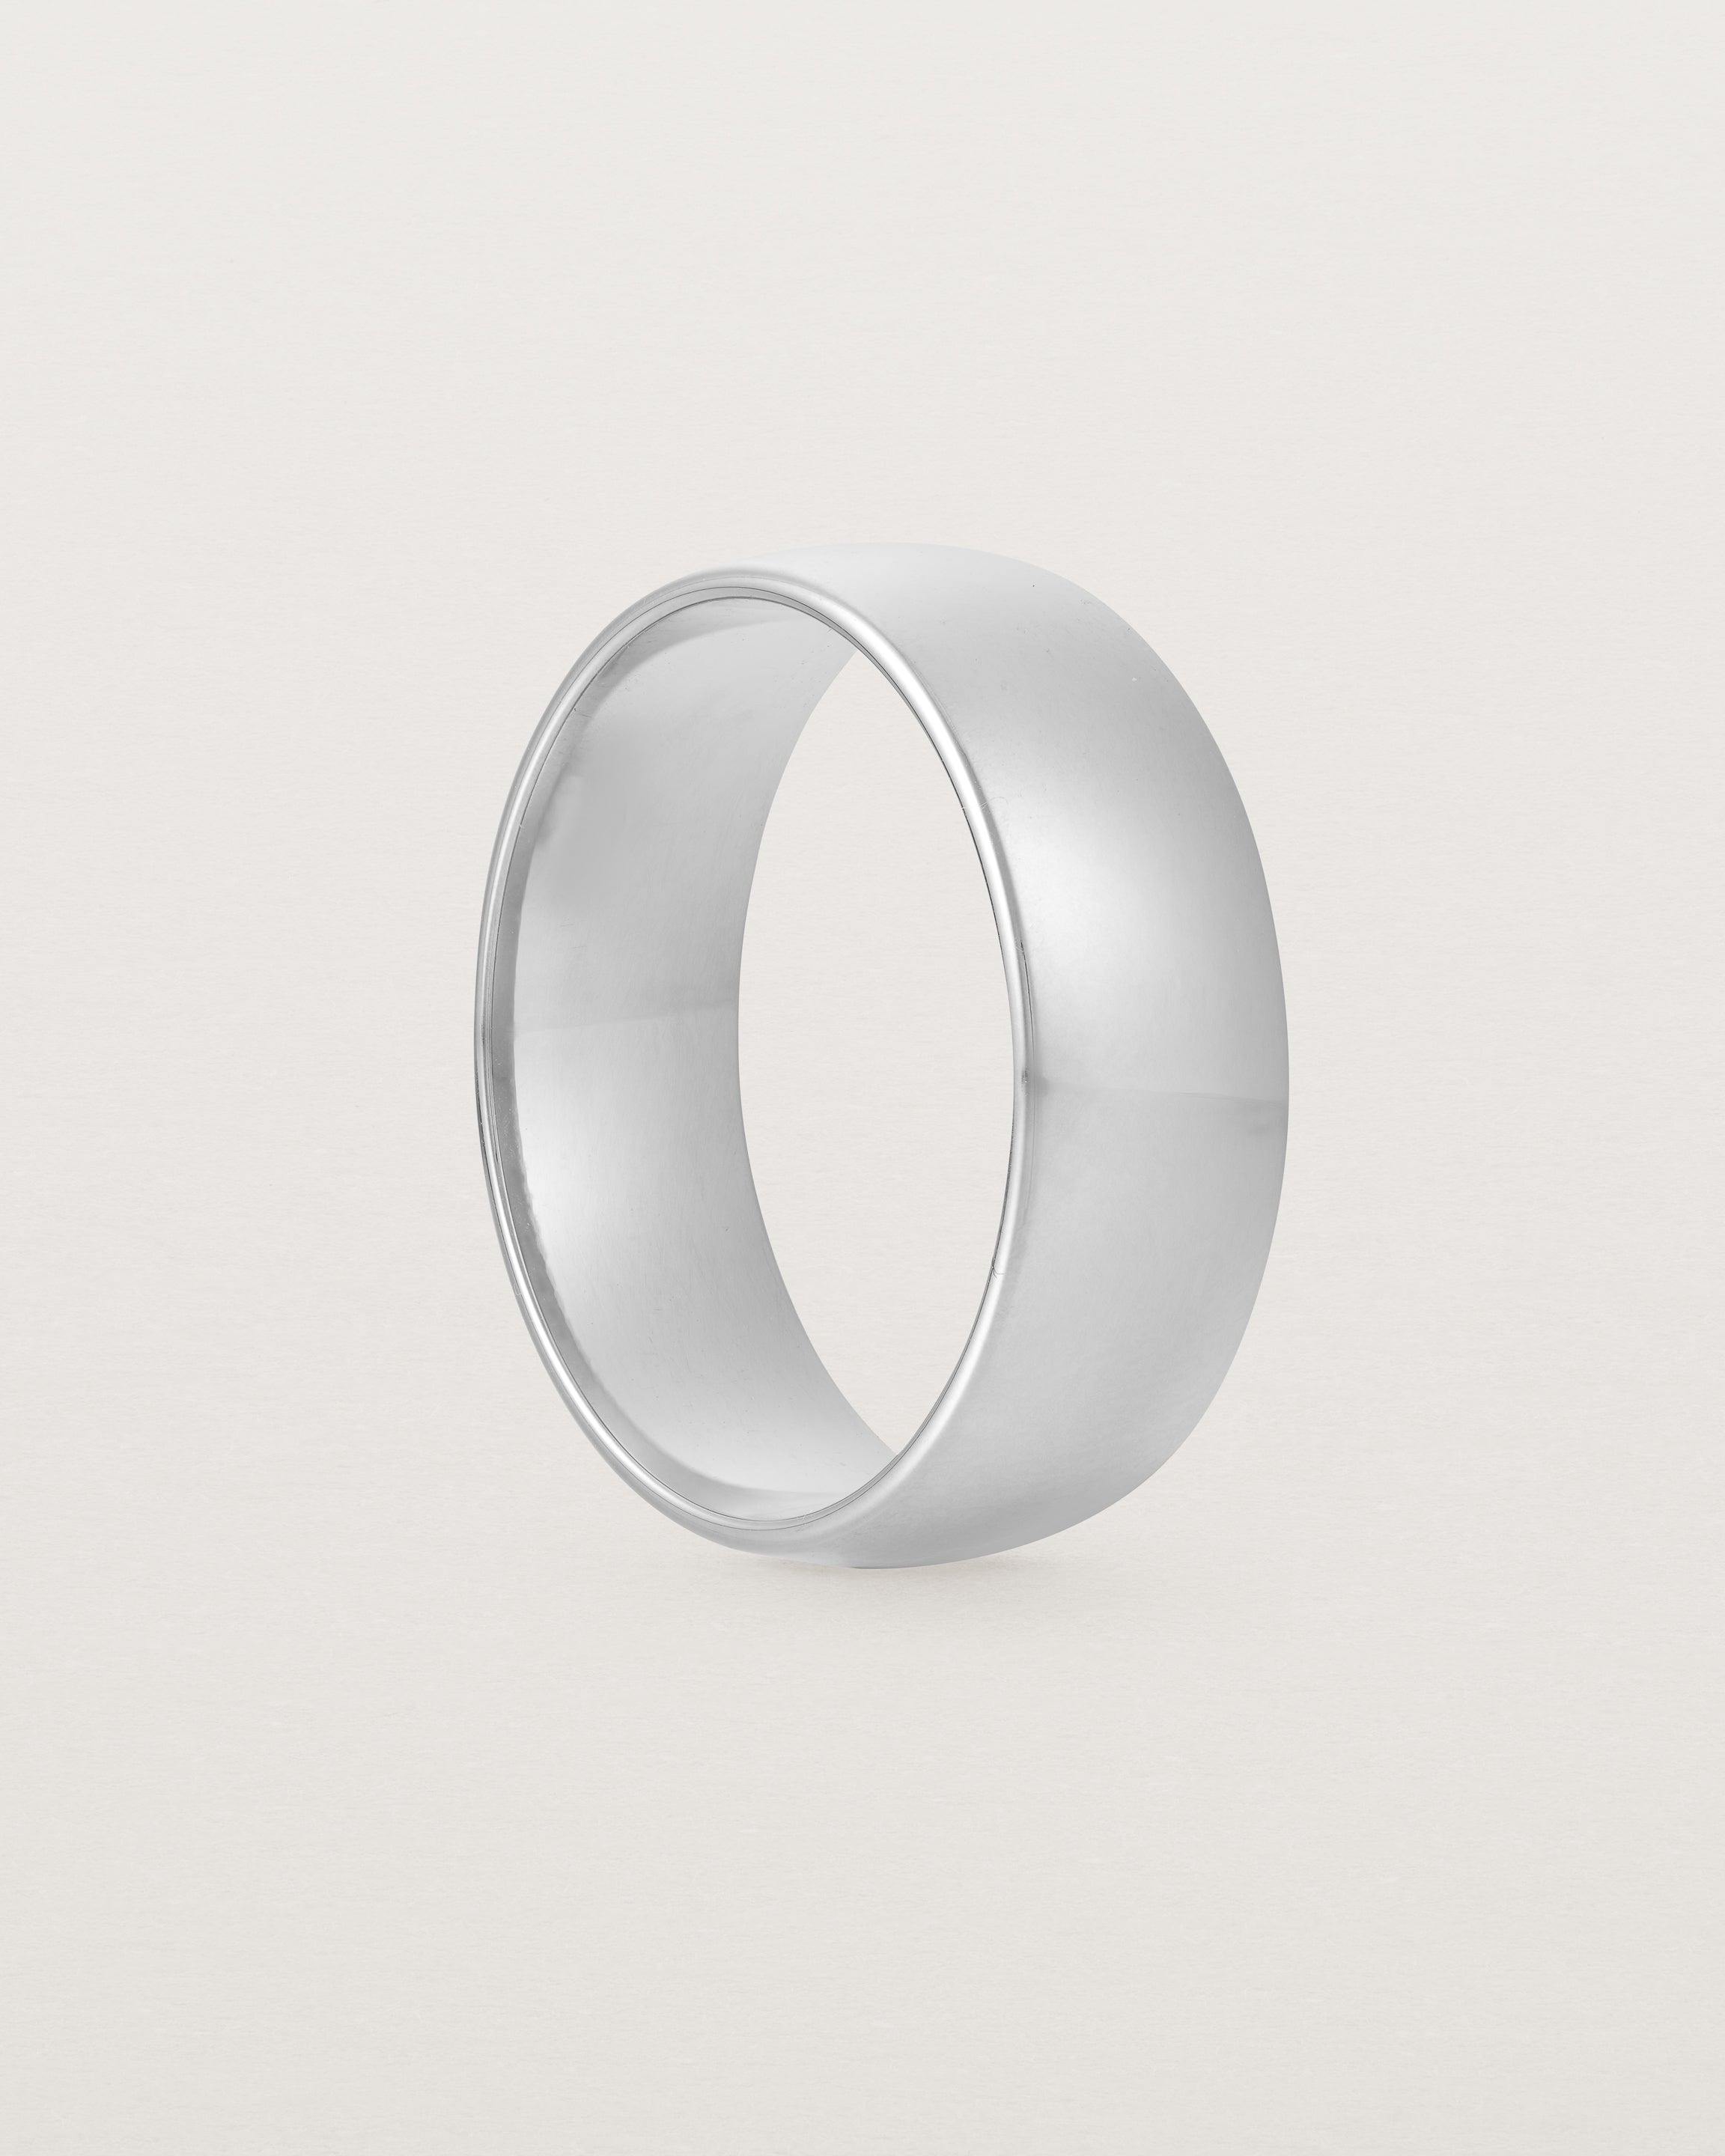 The side view of a heavy 7mm wedding band in white gold